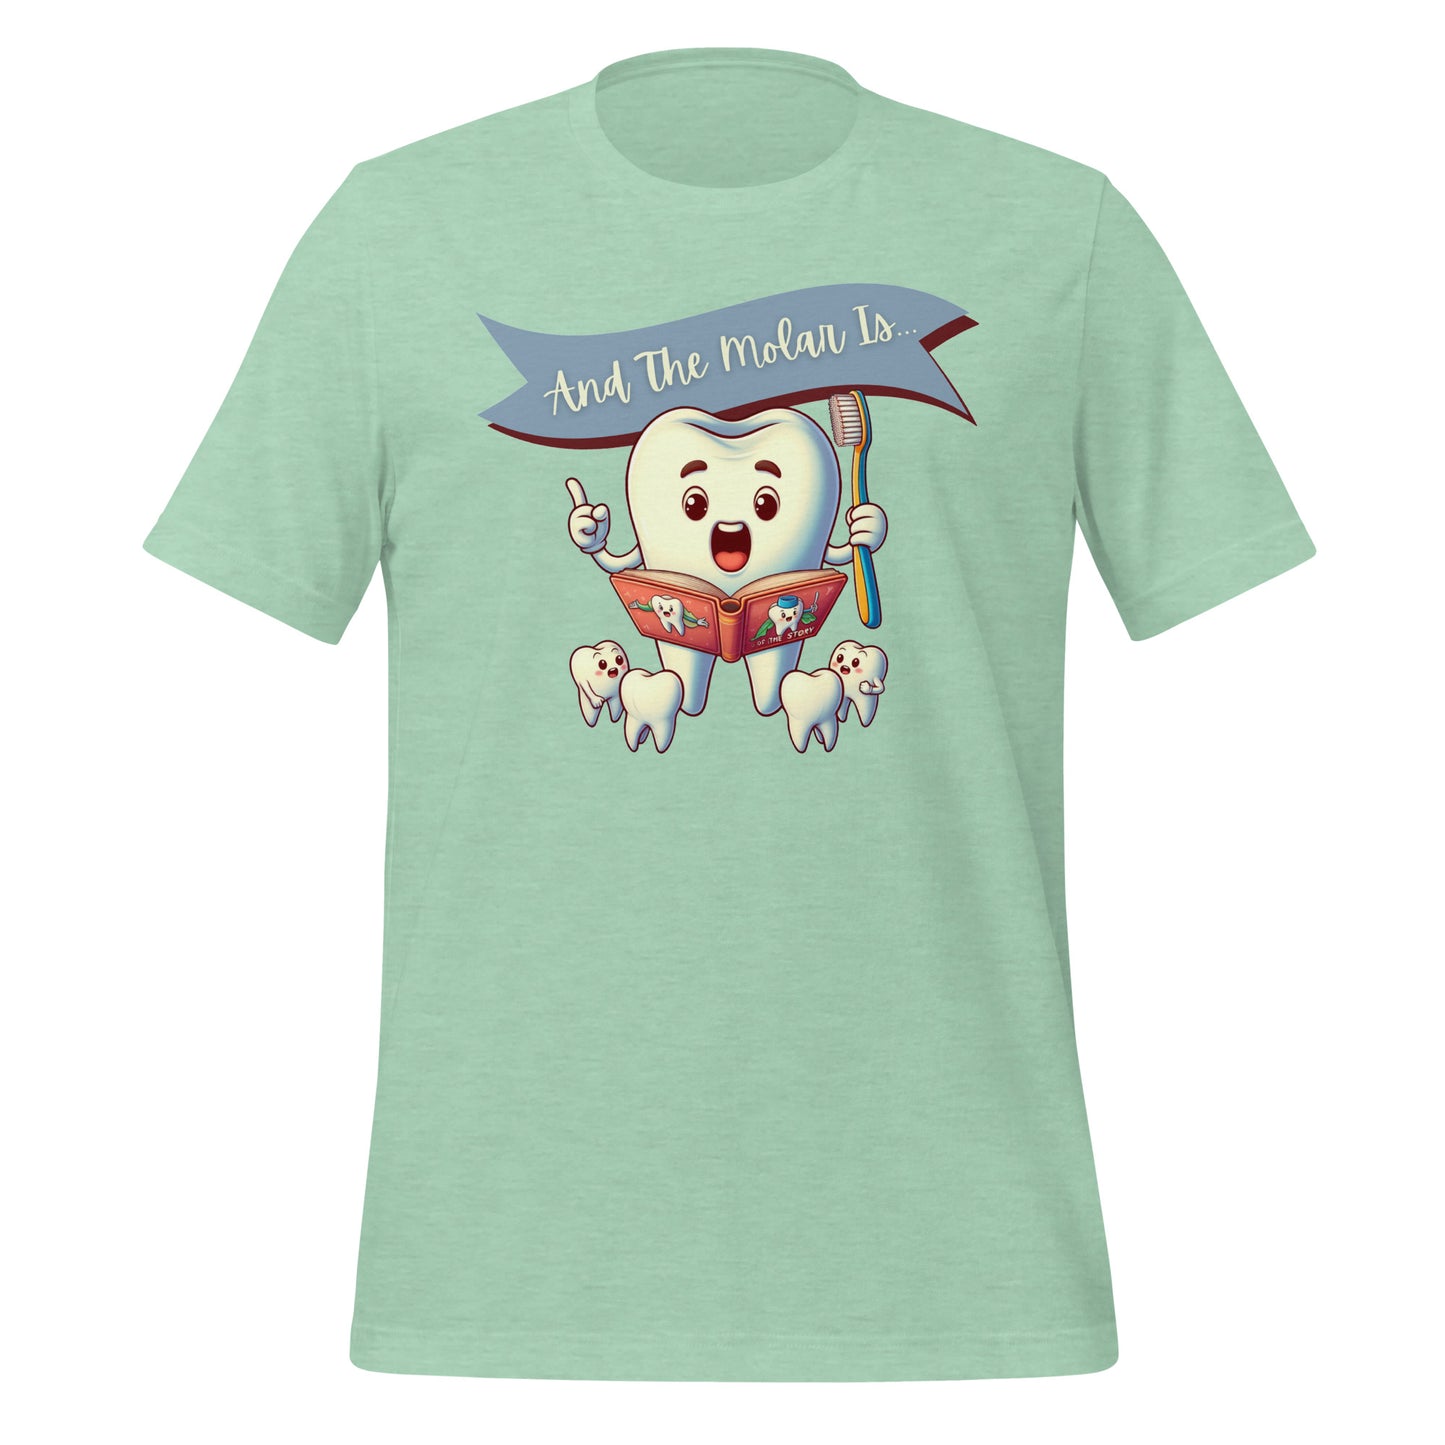 Cute dental shirt featuring a smiling tooth character reading a book with the caption ‘And The Molar Is,’ surrounded by smaller tooth characters. Heather prism mint color.